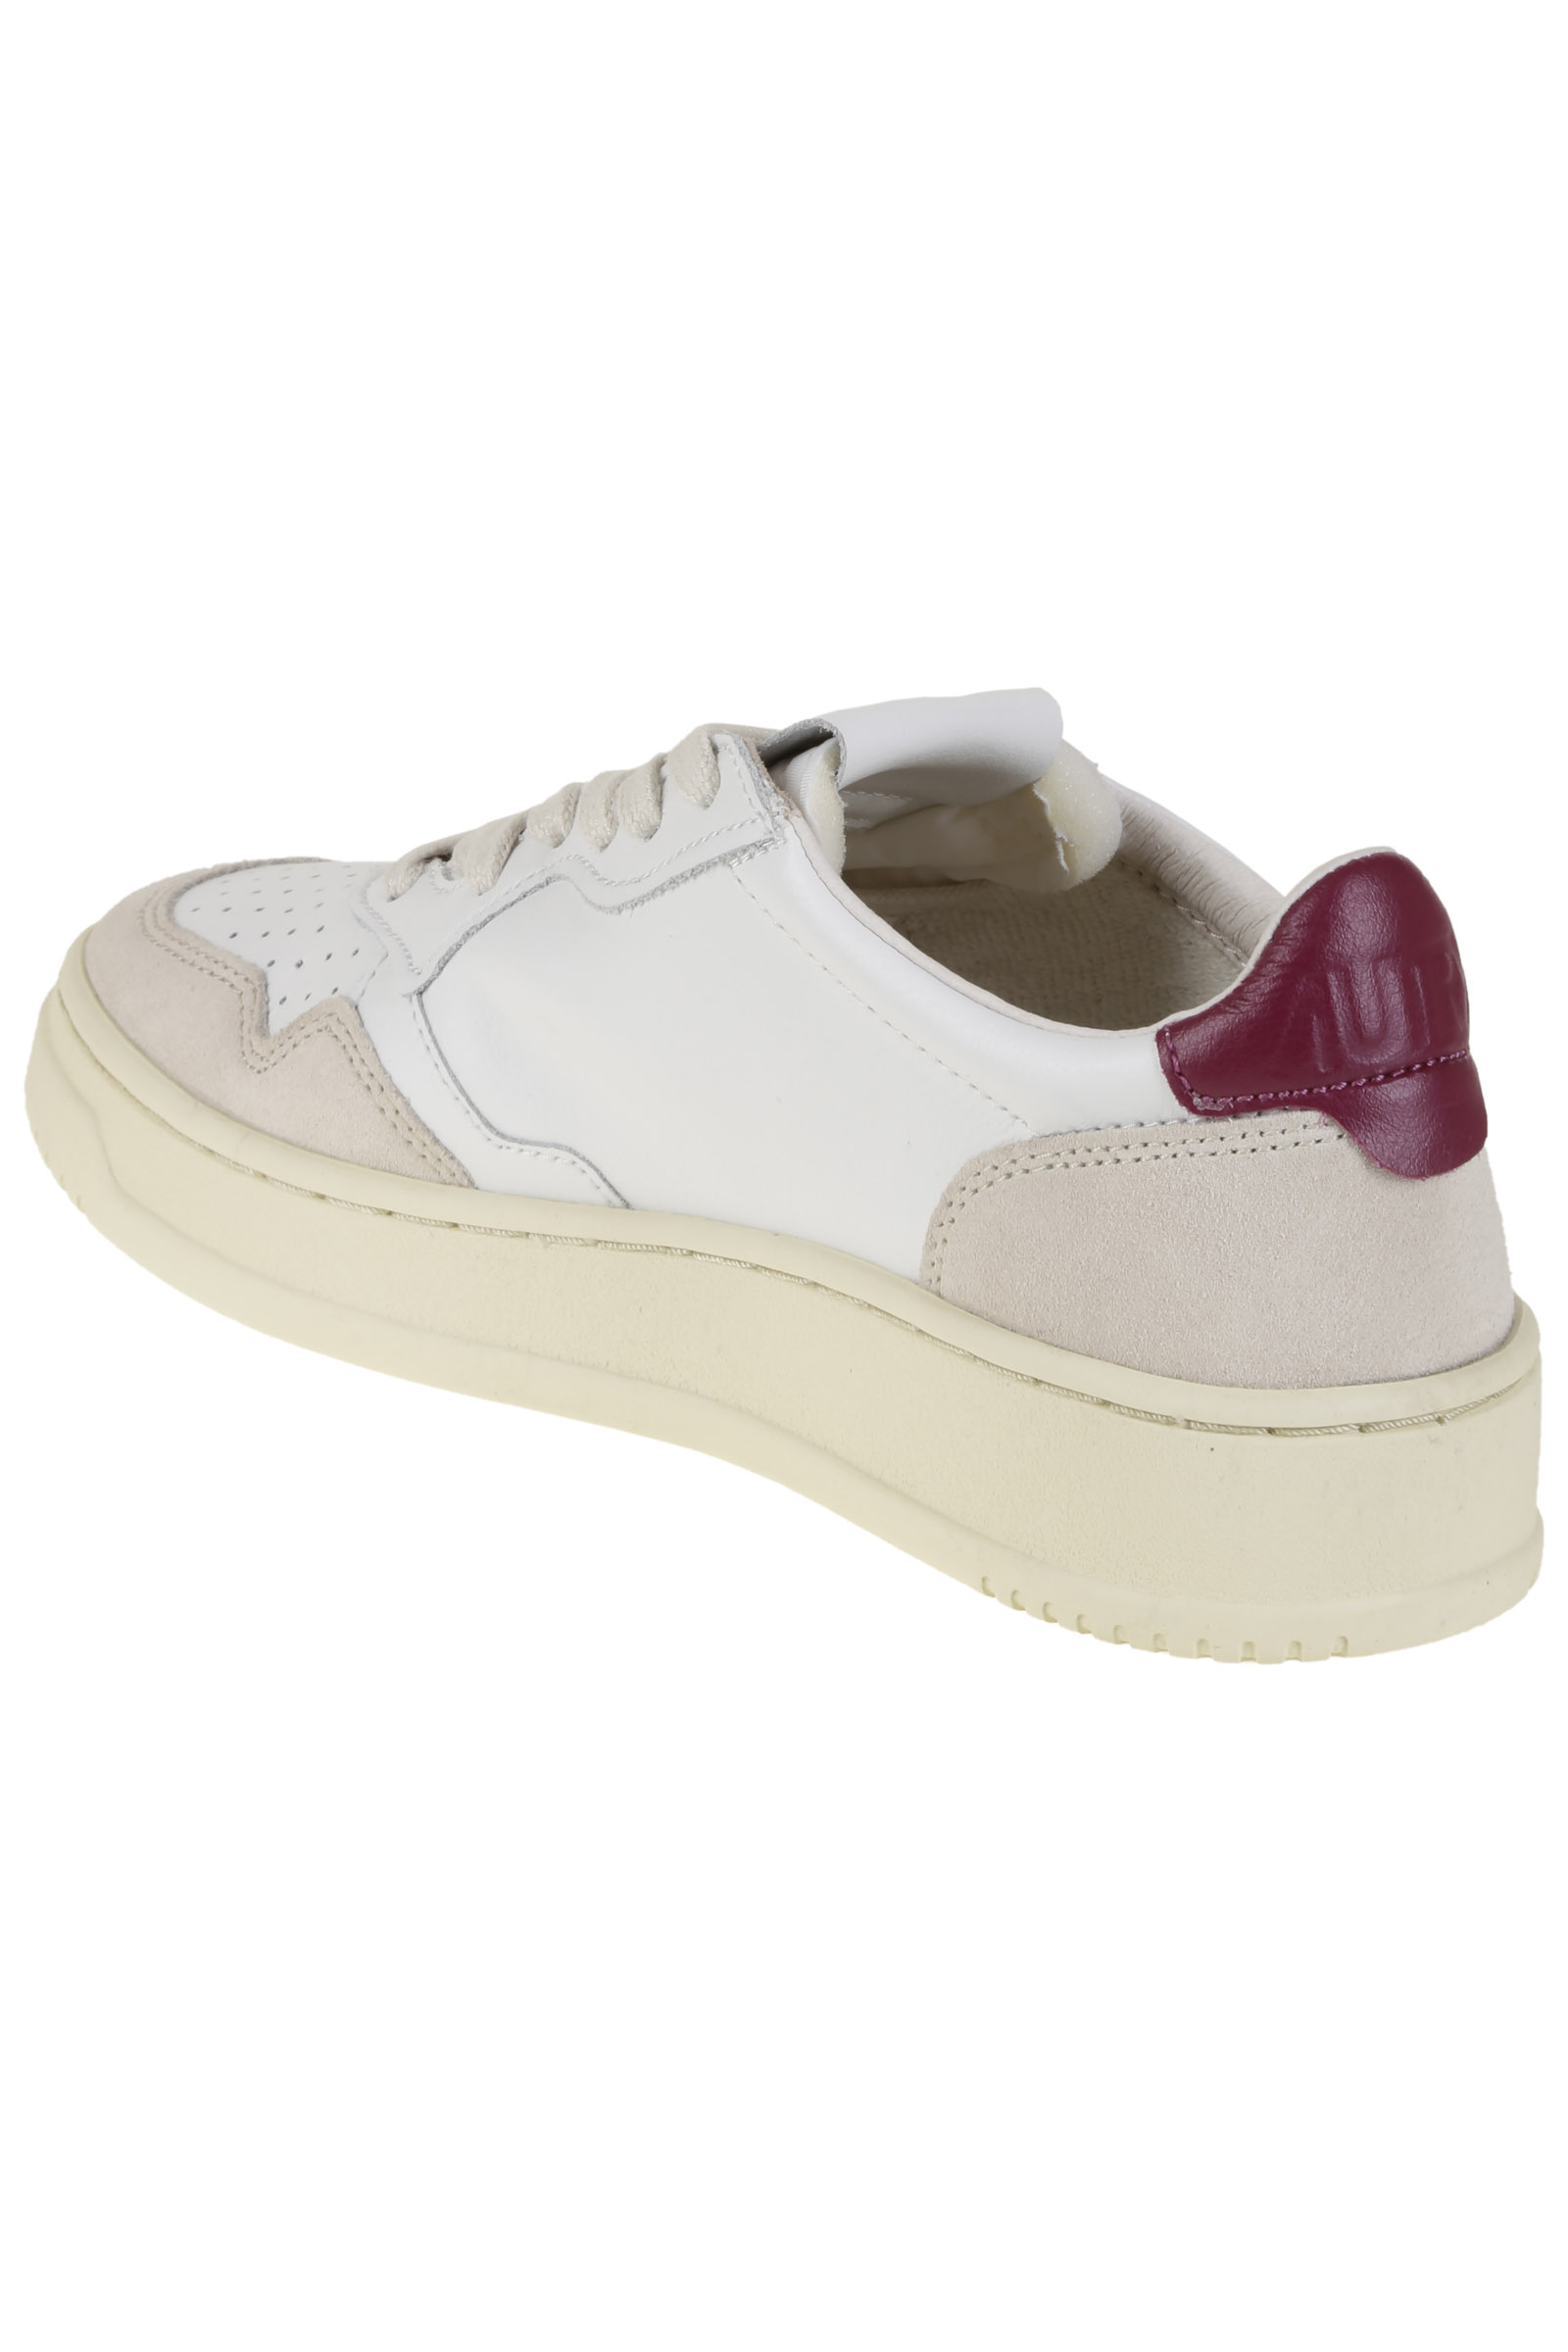 Immagine di Autry | Autry 01 Low Leat Suede